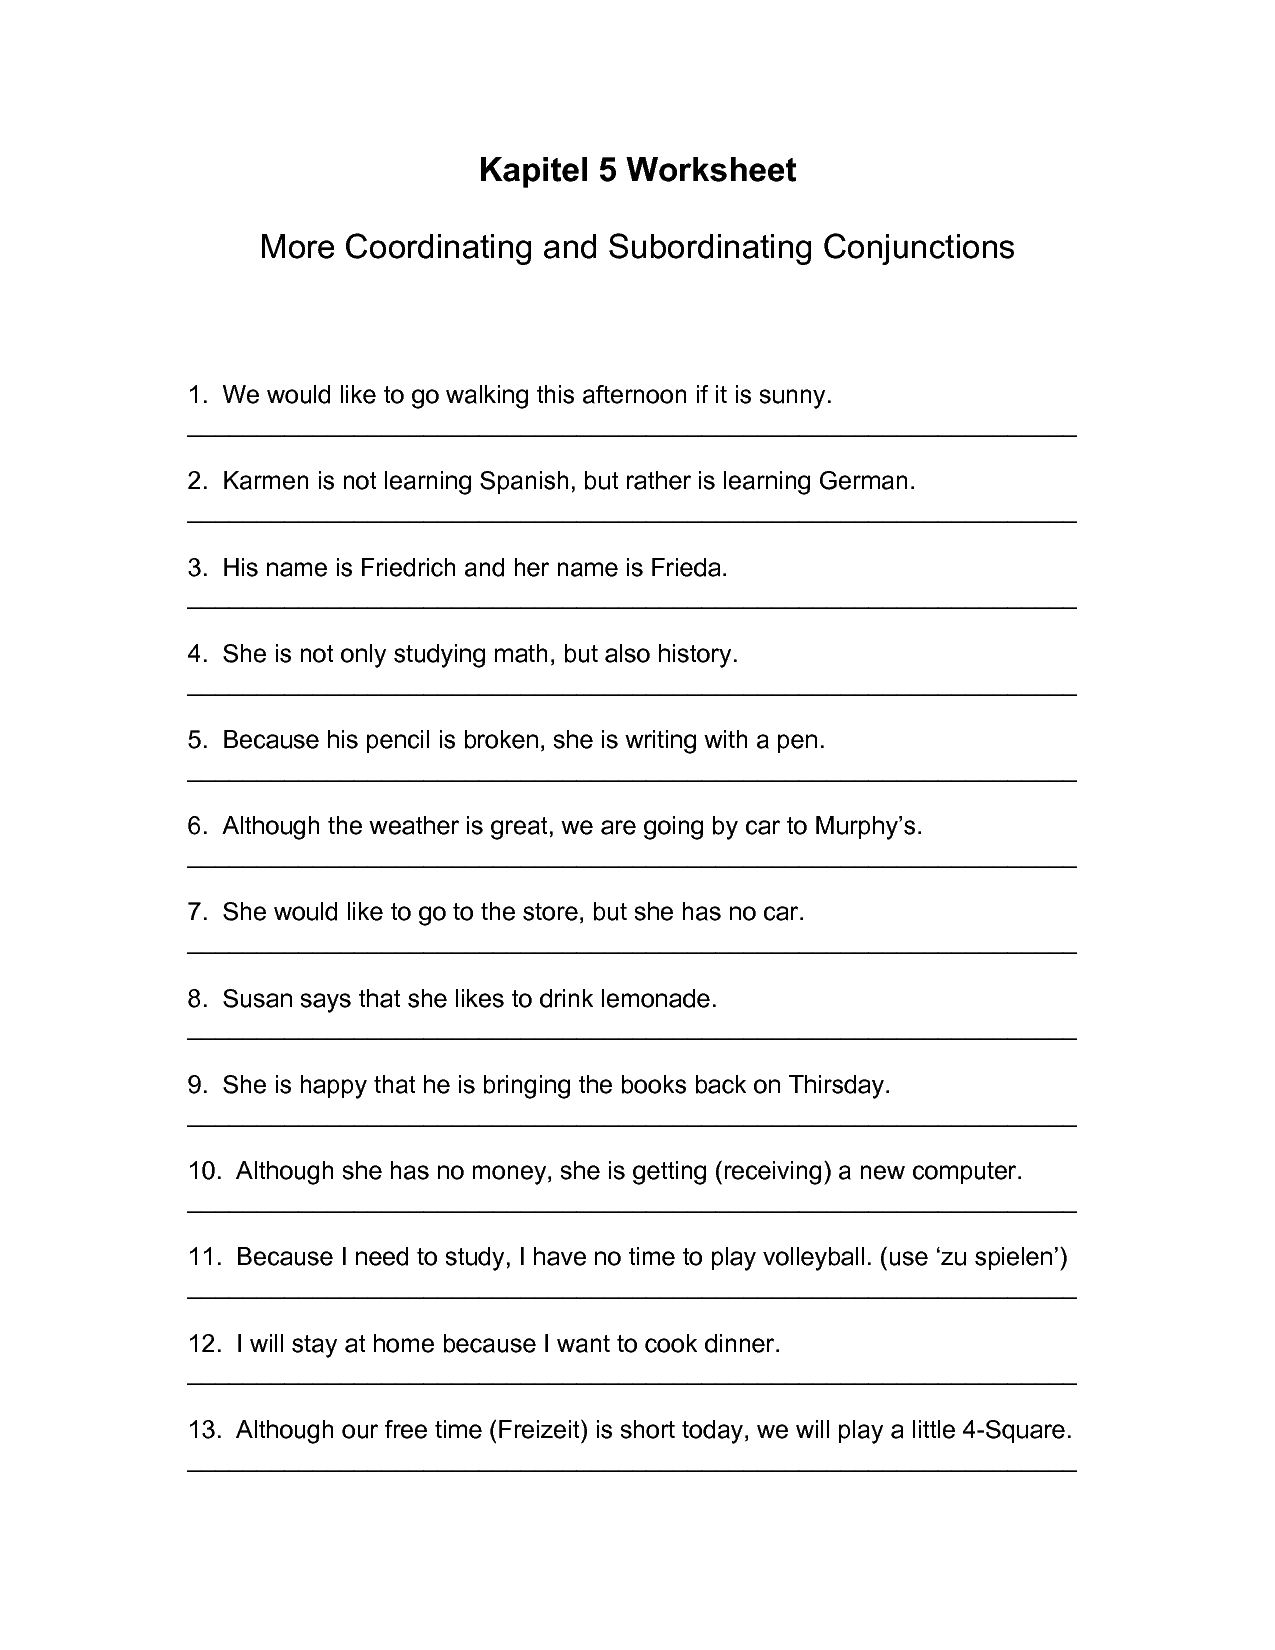 subordinating-conjunctions-examples-english-study-here